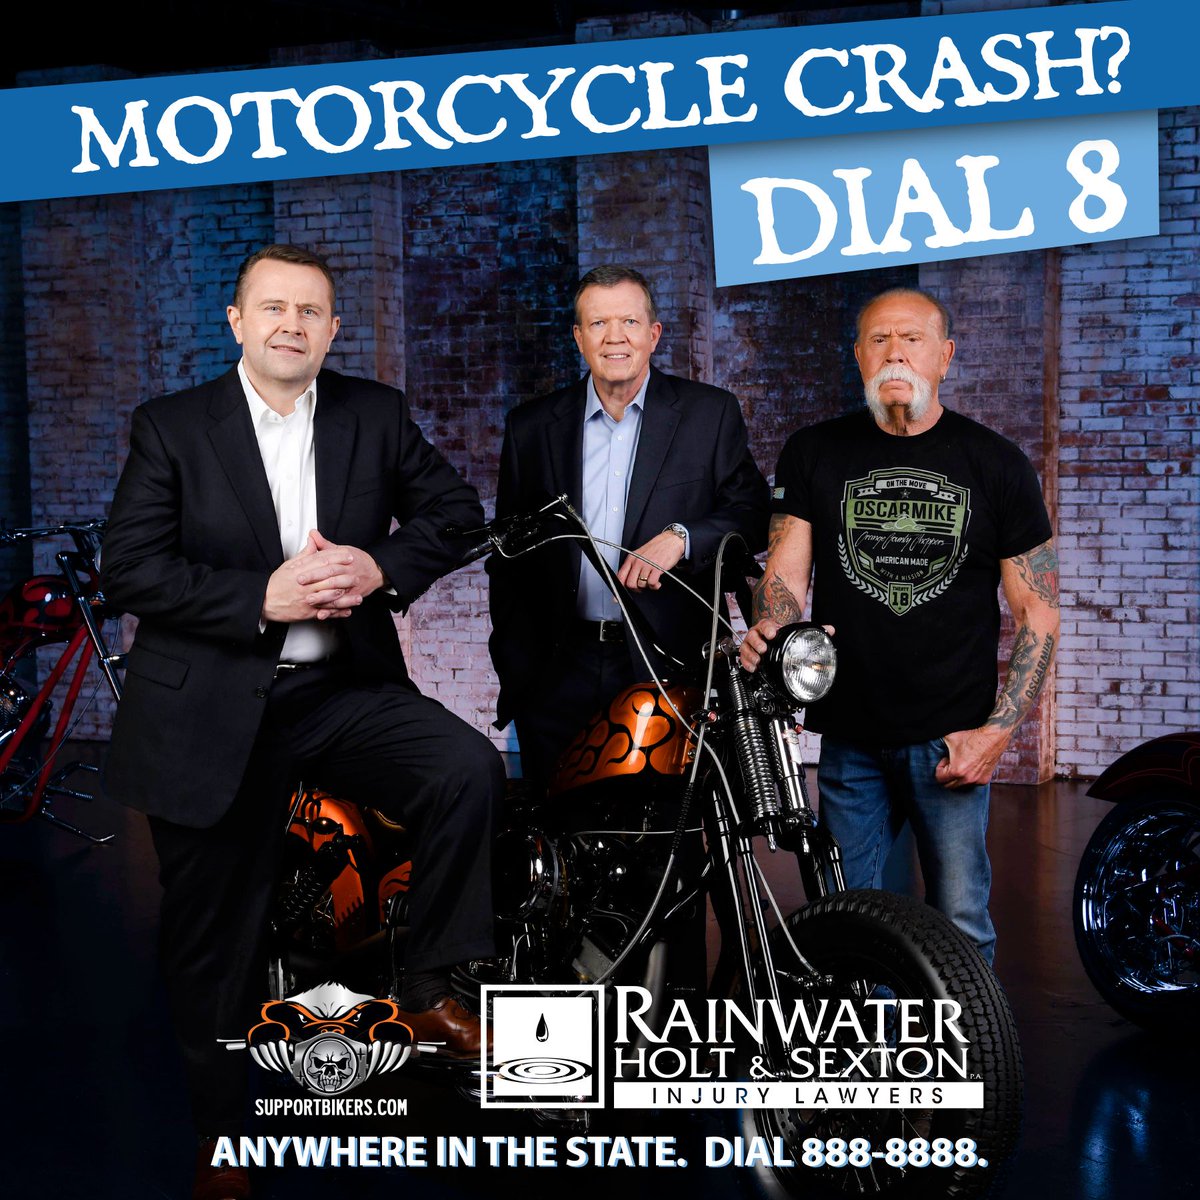 Just like @paulteutulsr knows his
way around the shop, our attorneys know their way
around the courtroom. That’s why hundreds of bikers
have trusted us, and you can too! Dial 8! 💧
#motorcycle #stayornery #badgersandbikerlifestyle
#BadgerNationSponsor #supportbikers #orneryones